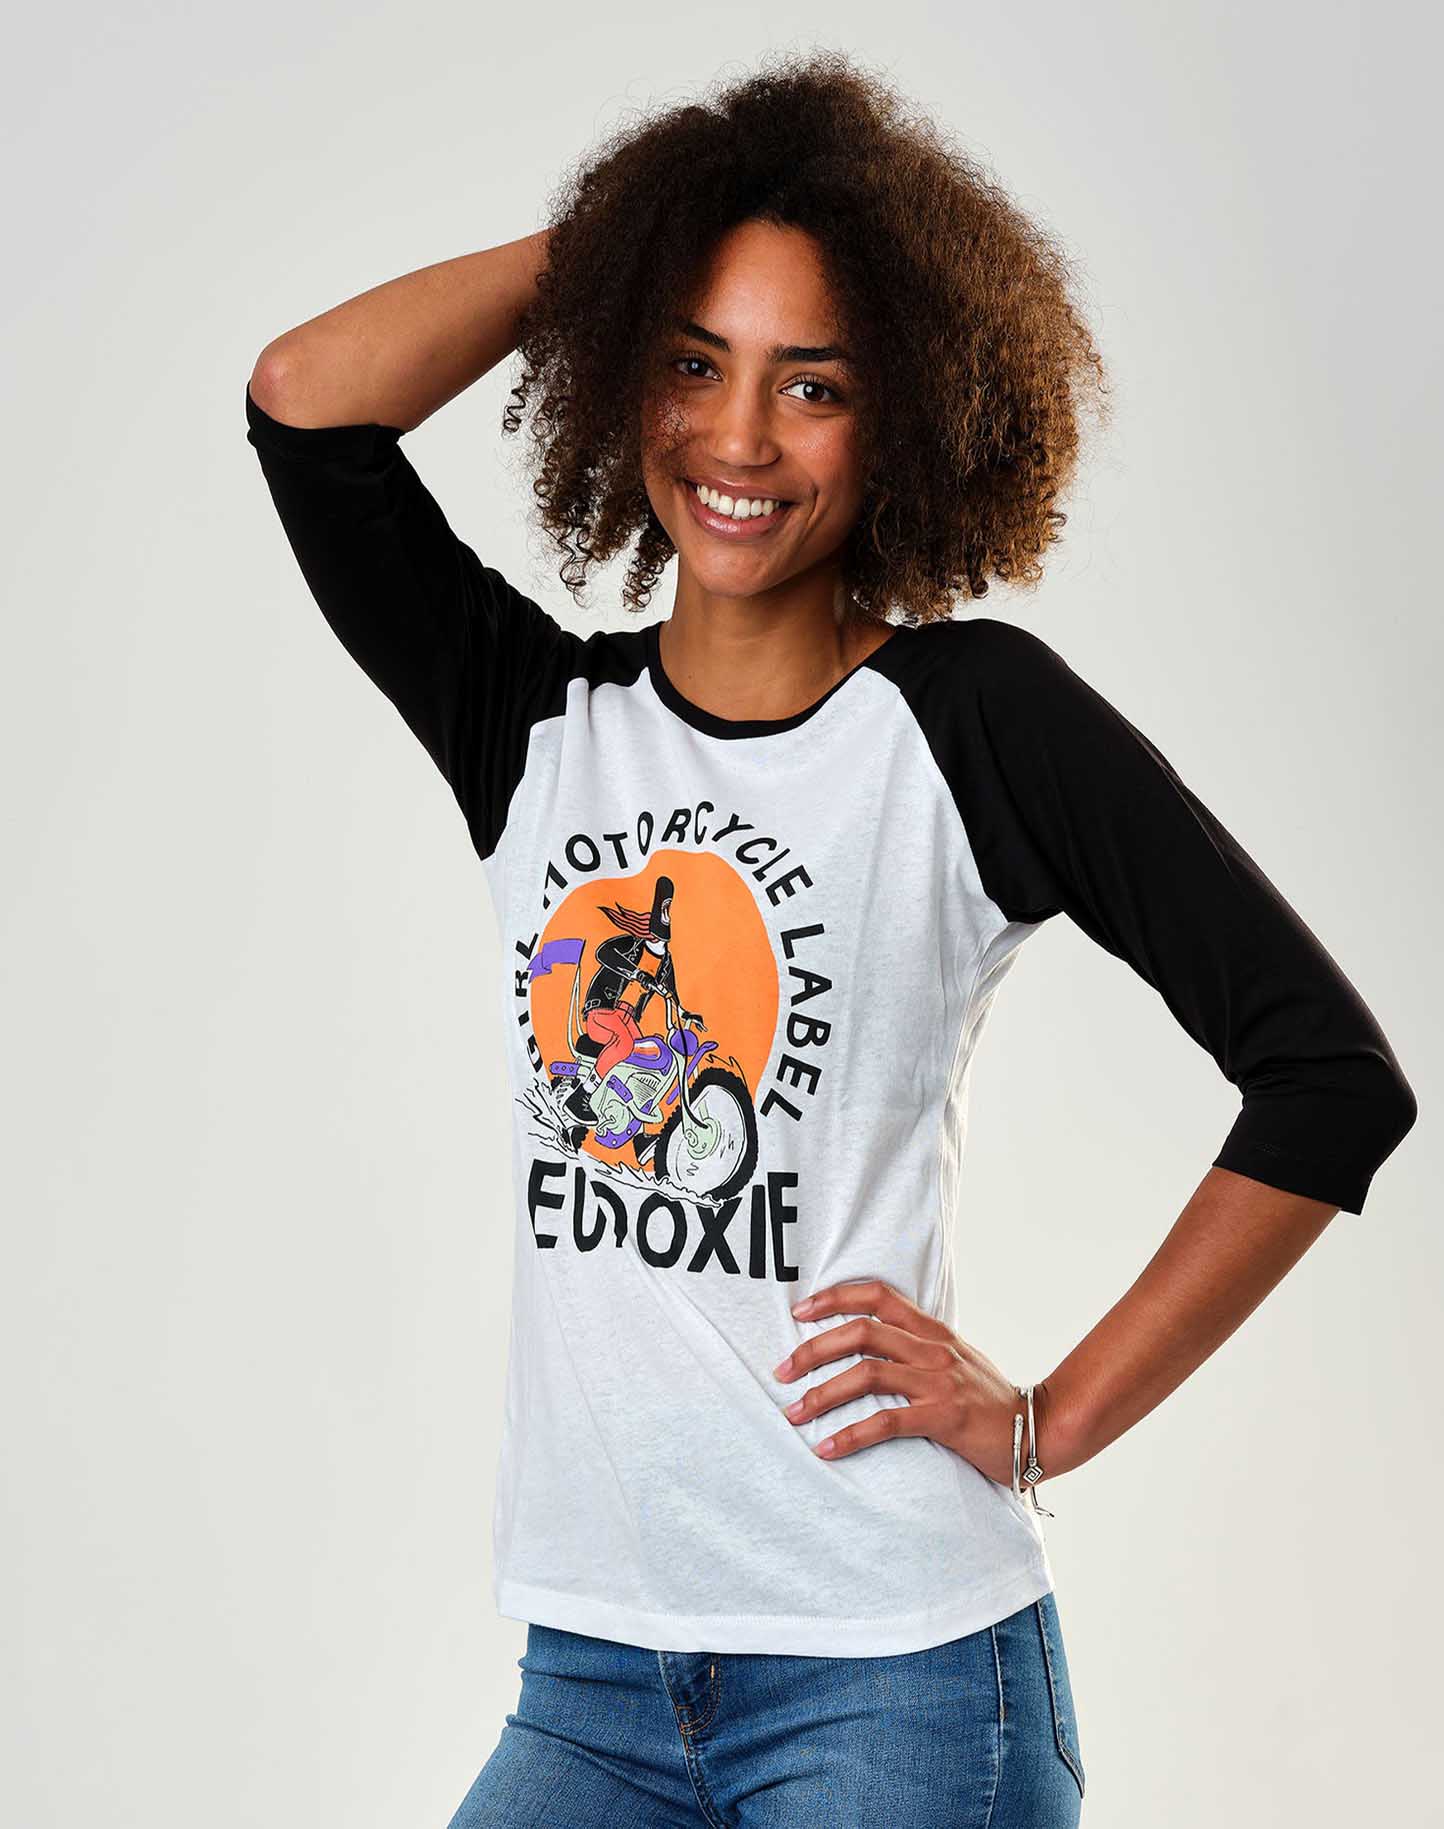 A young woman wearing black &amp; white baseball motorcycle t-shirt from Eudoxie 